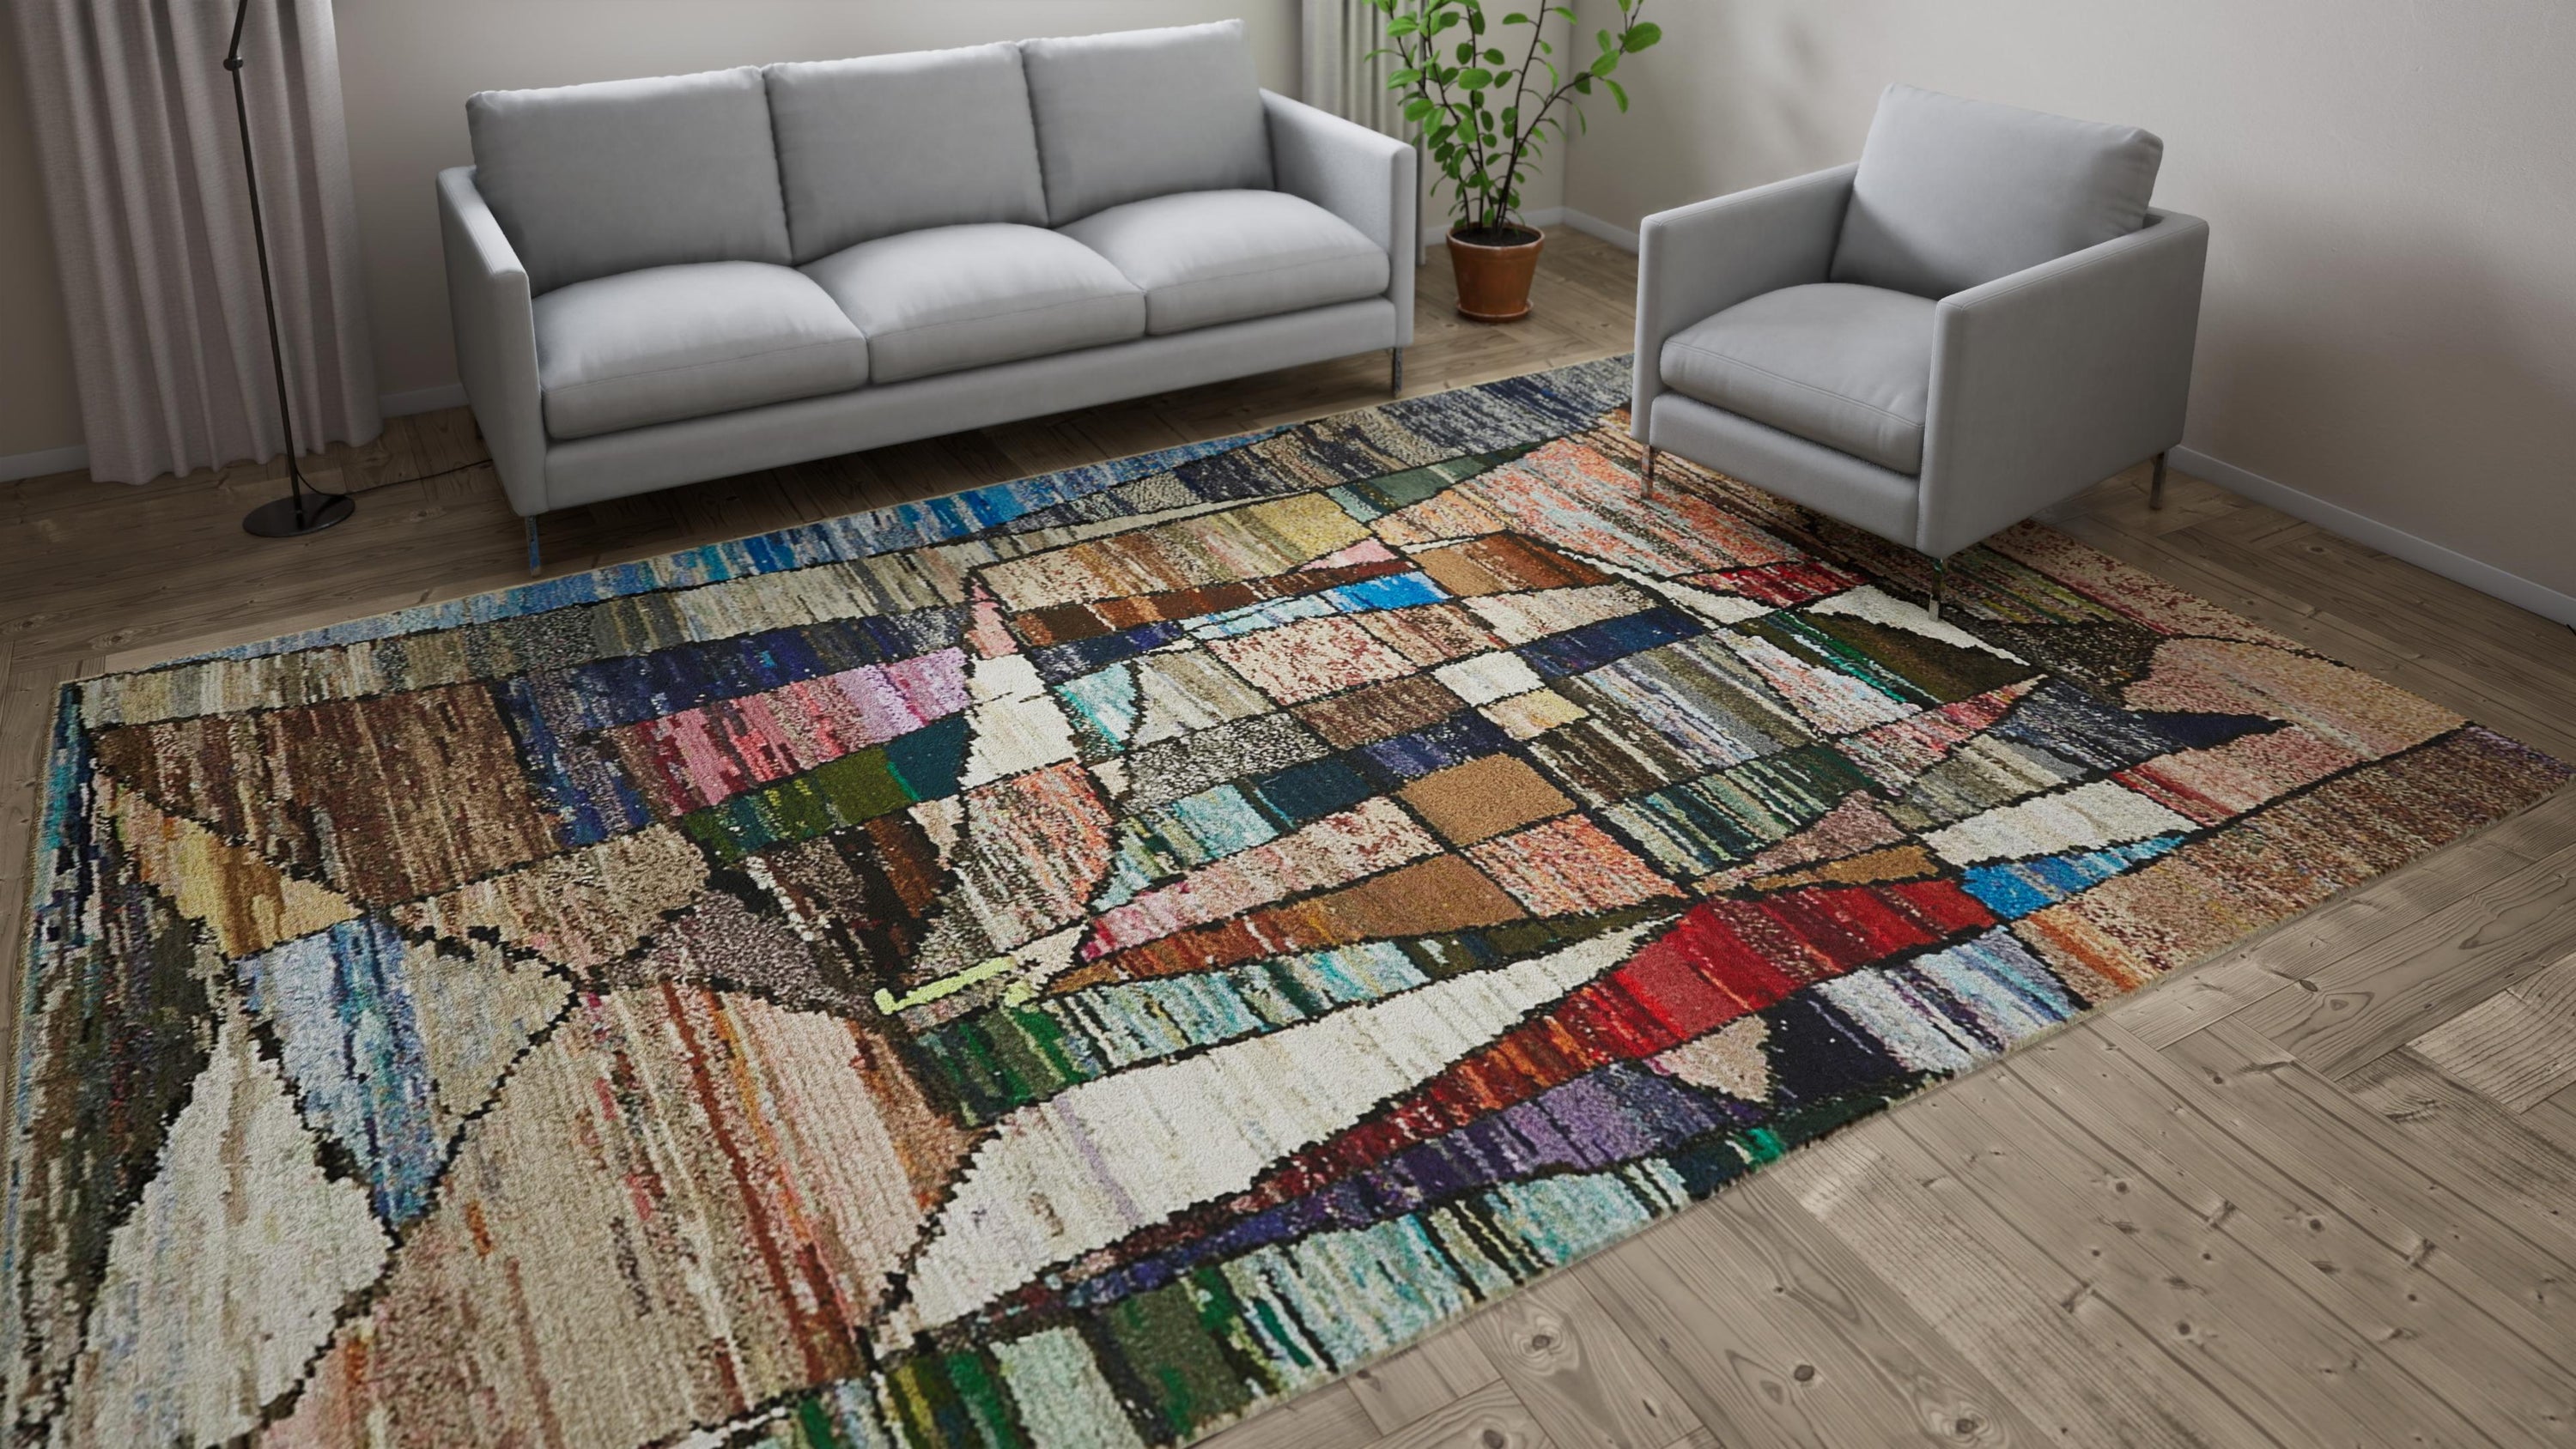 Multicolored Moroccan Wool Cotton Blend Rug - 8'3" x 12'7"